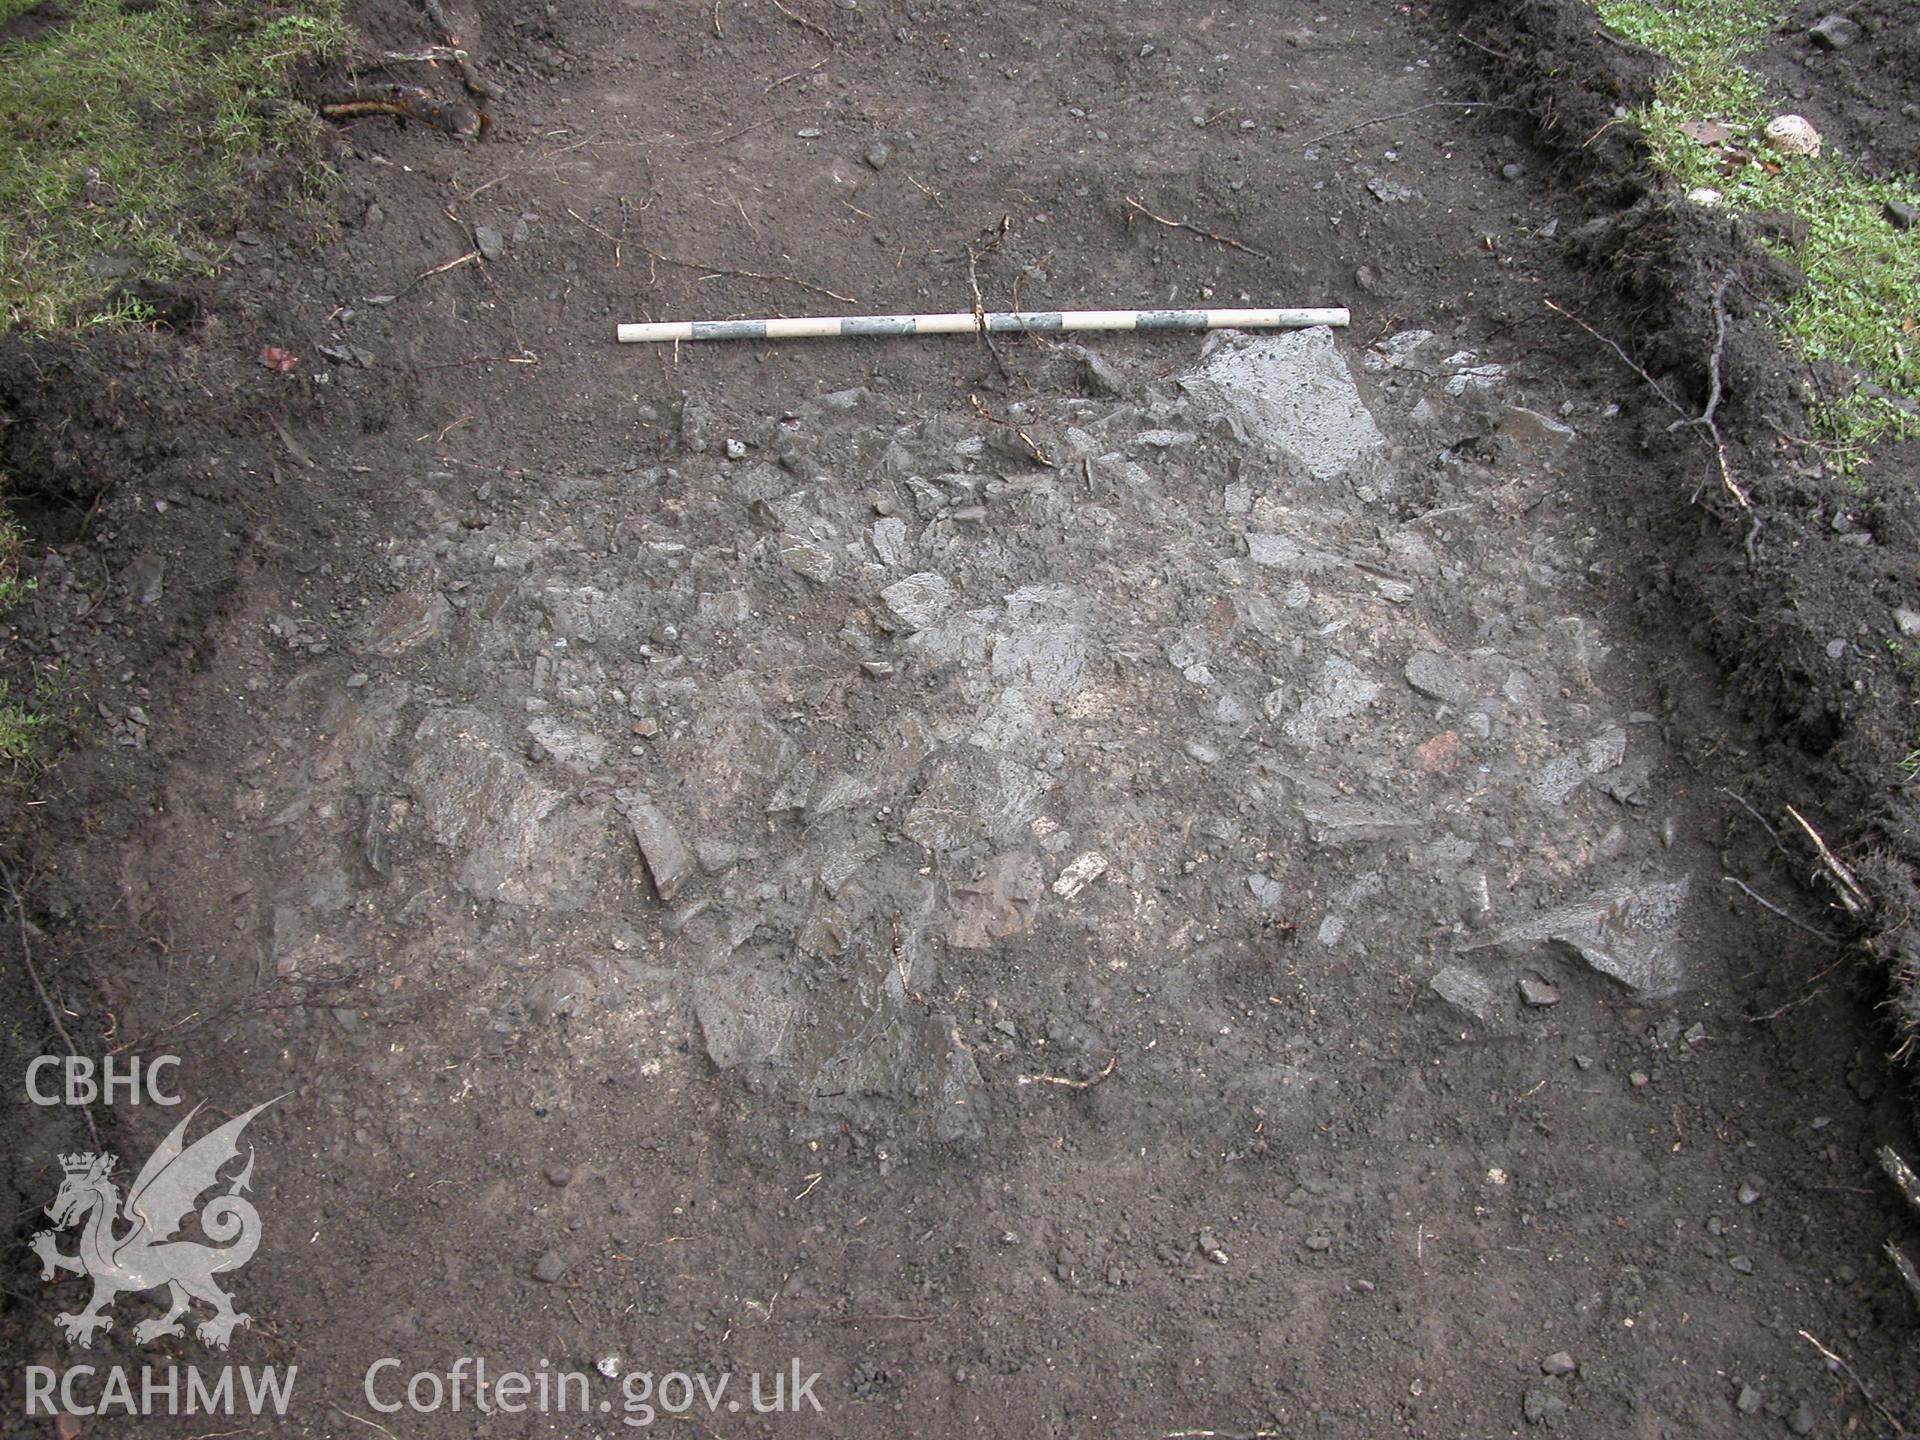 Digital photograph captioned: 'Plan view of stone feature (105), scale 1x1m' plate 1 of Archaeological Watching Brief and Desk Based Assessment for the Old Bowling Green, Cannons Lane, Presteigne. CAP Report Number 653.